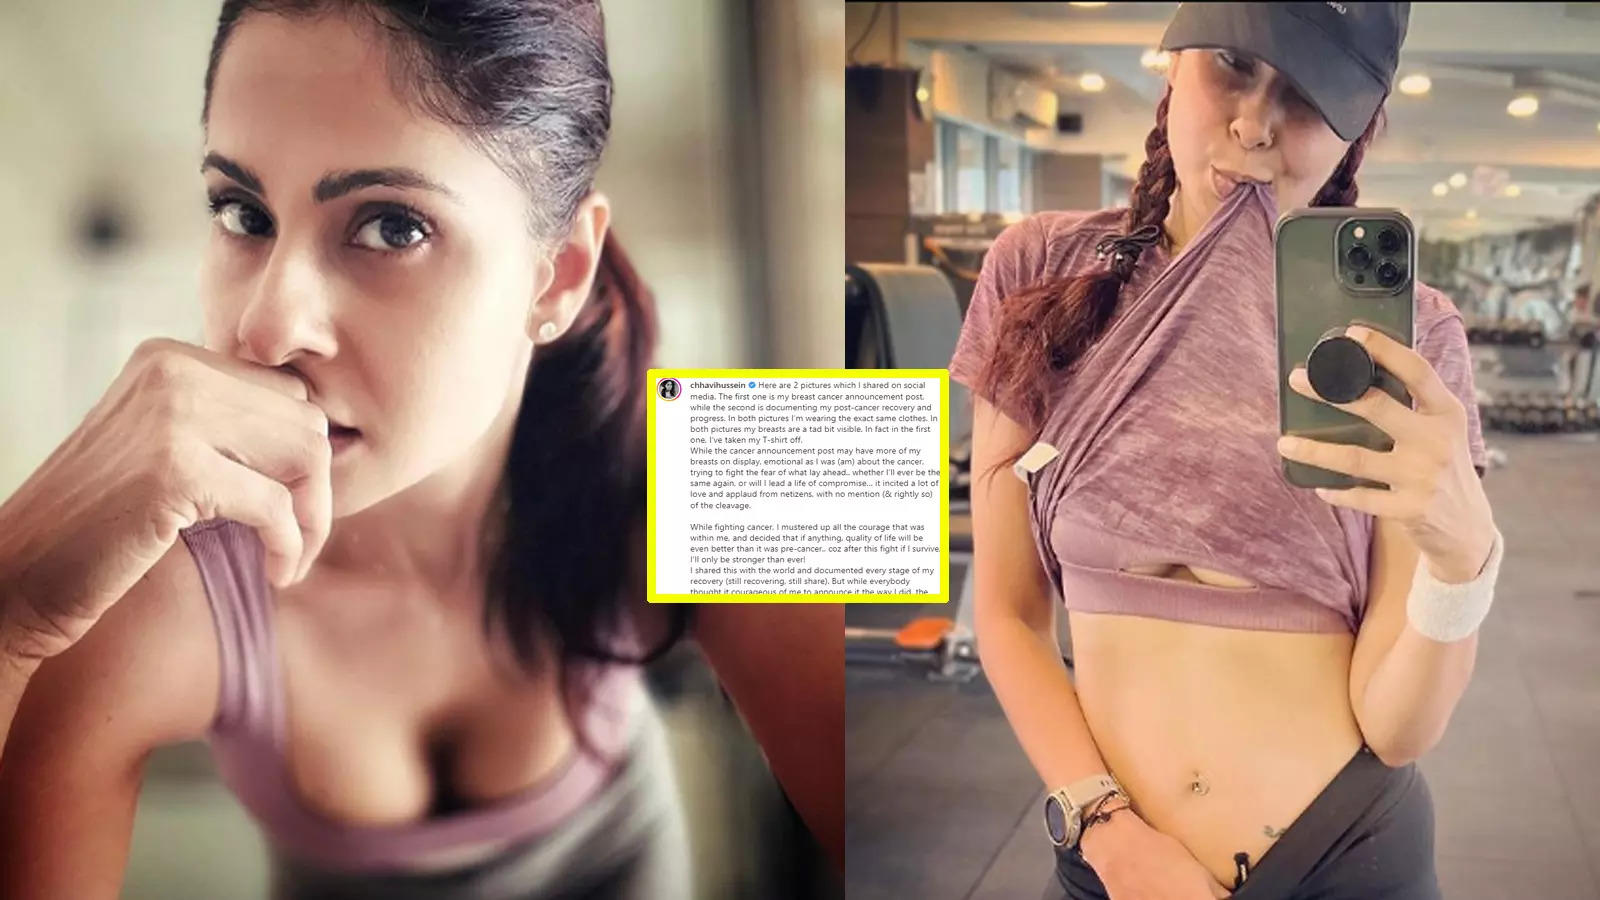 anshu rathi recommends lady showing her boobs pic